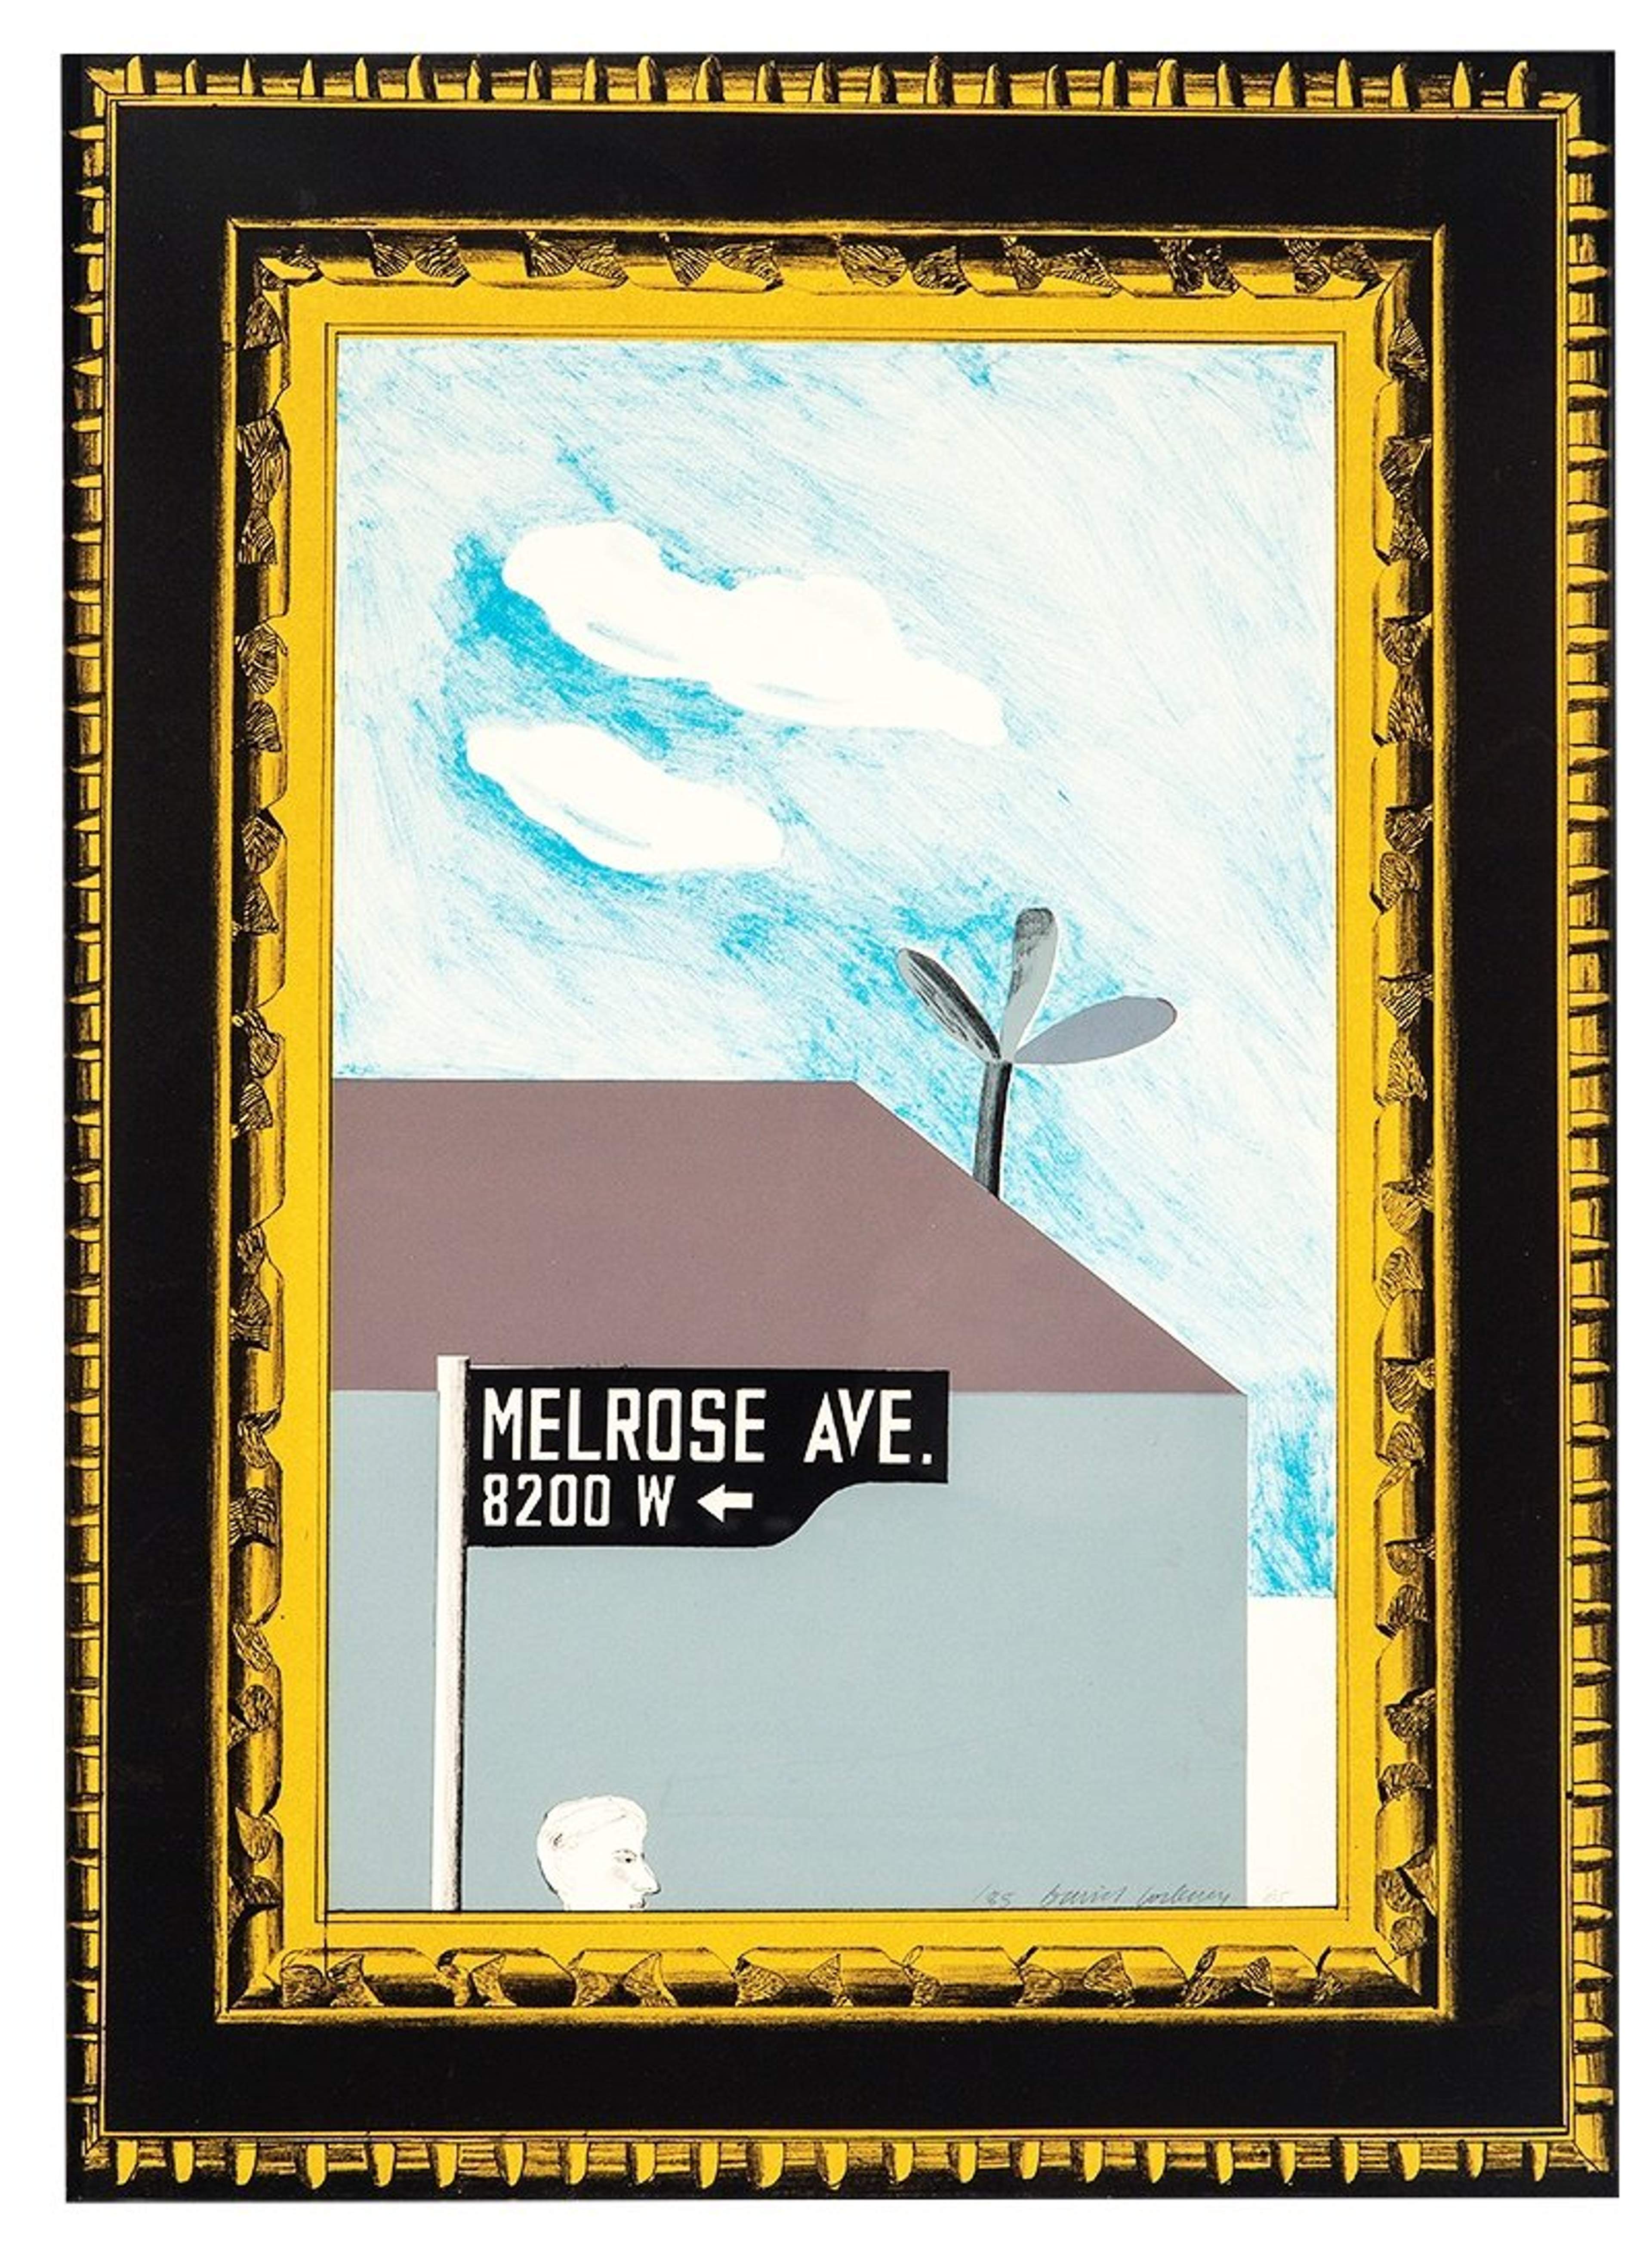 Picture Of Melrose Avenue In An Ornate Gold Frame - Signed Print